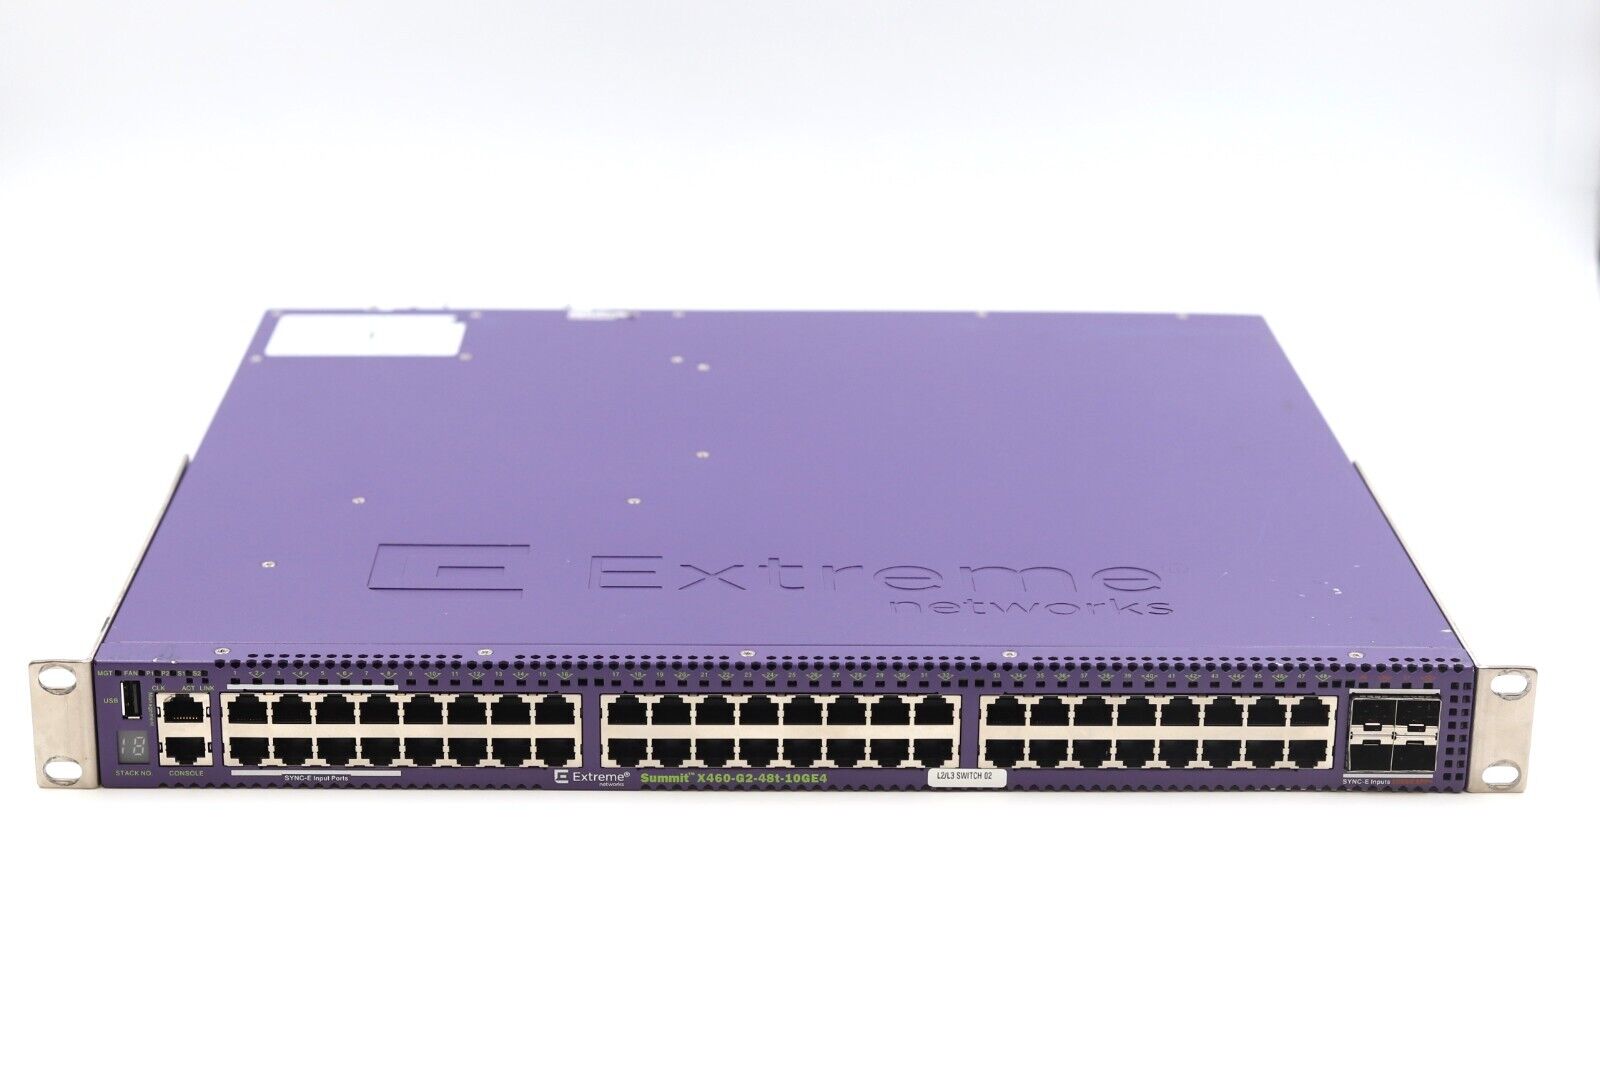 Extreme Networks Summit X460-G2-48t-10GE4-Base 48-Port Network Switch P/N: 16702